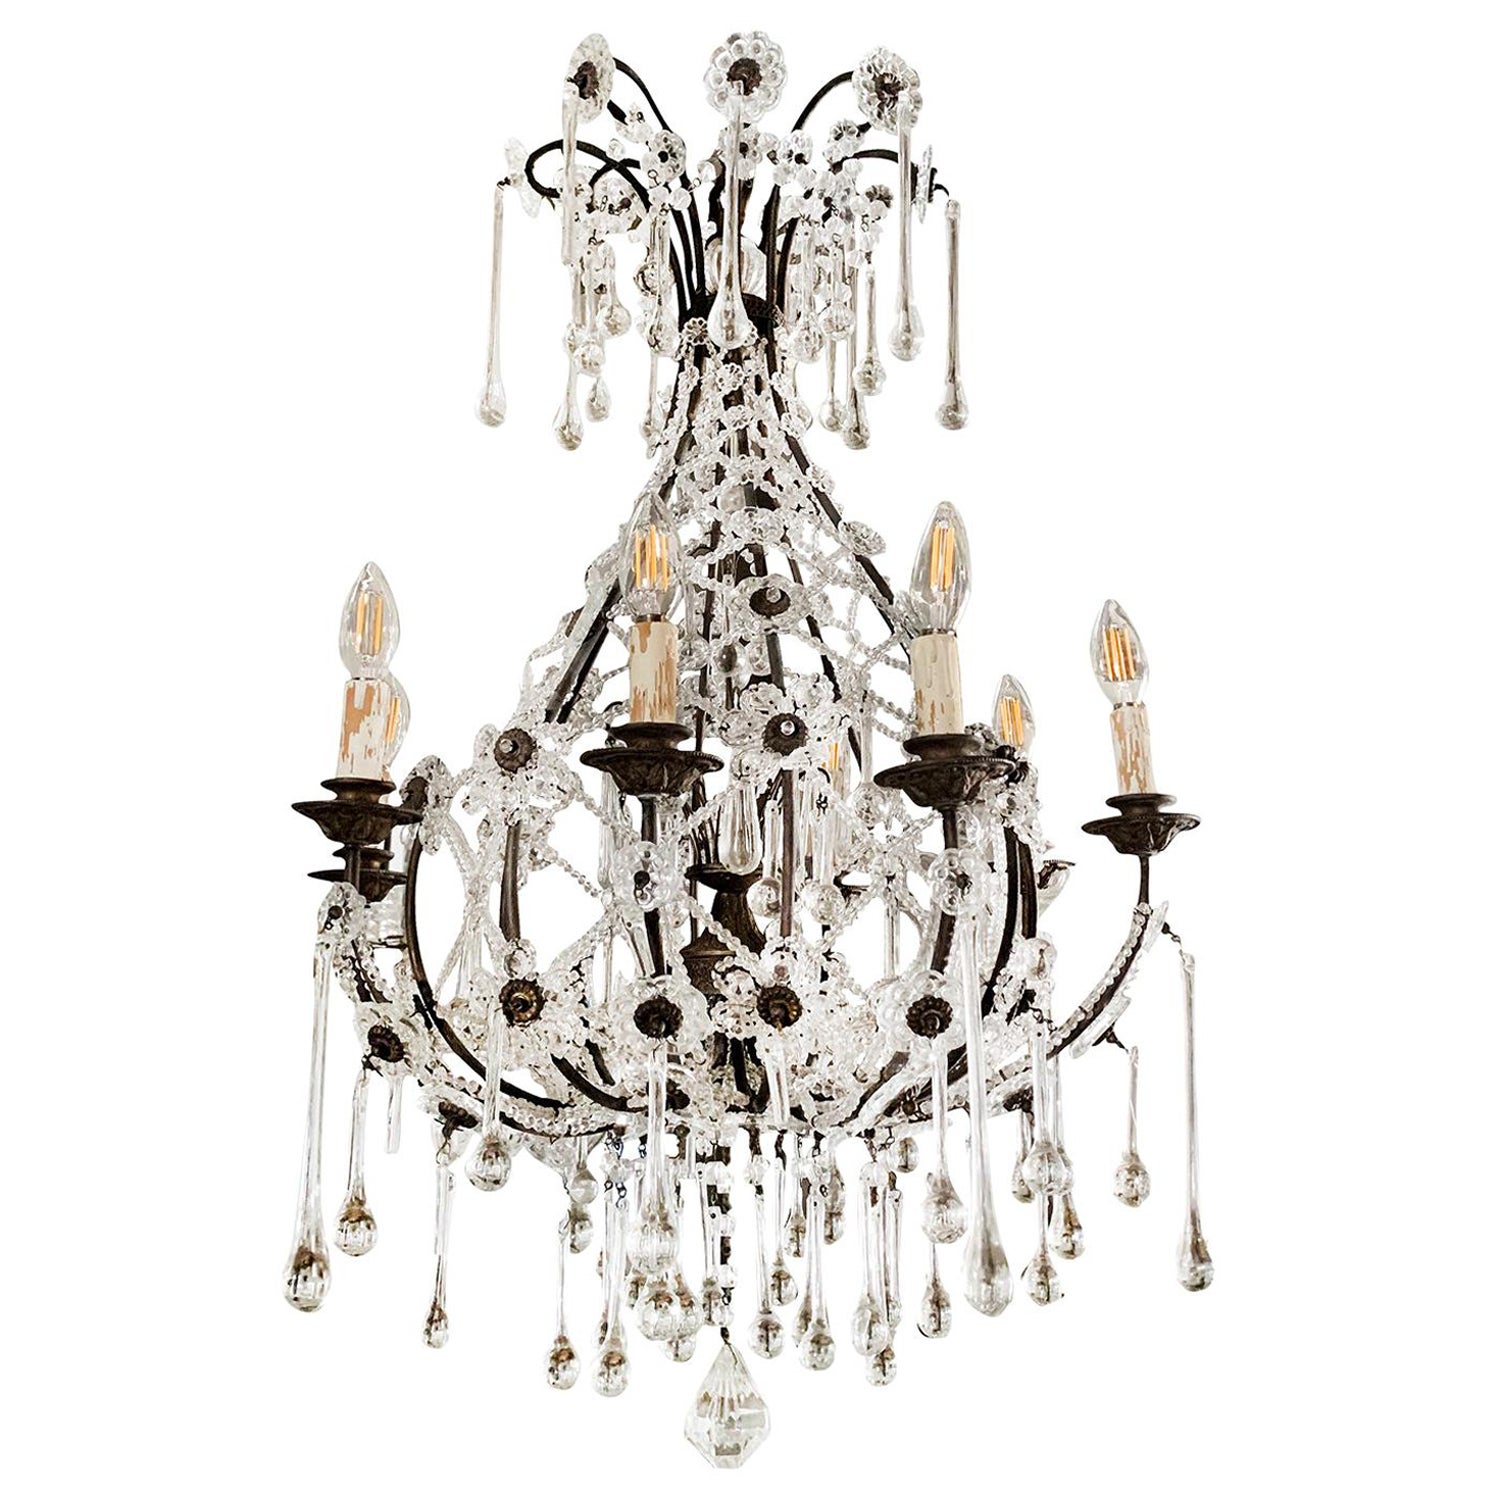 20th Century French Crystal Glass Teardrop Chandelier, Art Deco Ceiling Light For Sale